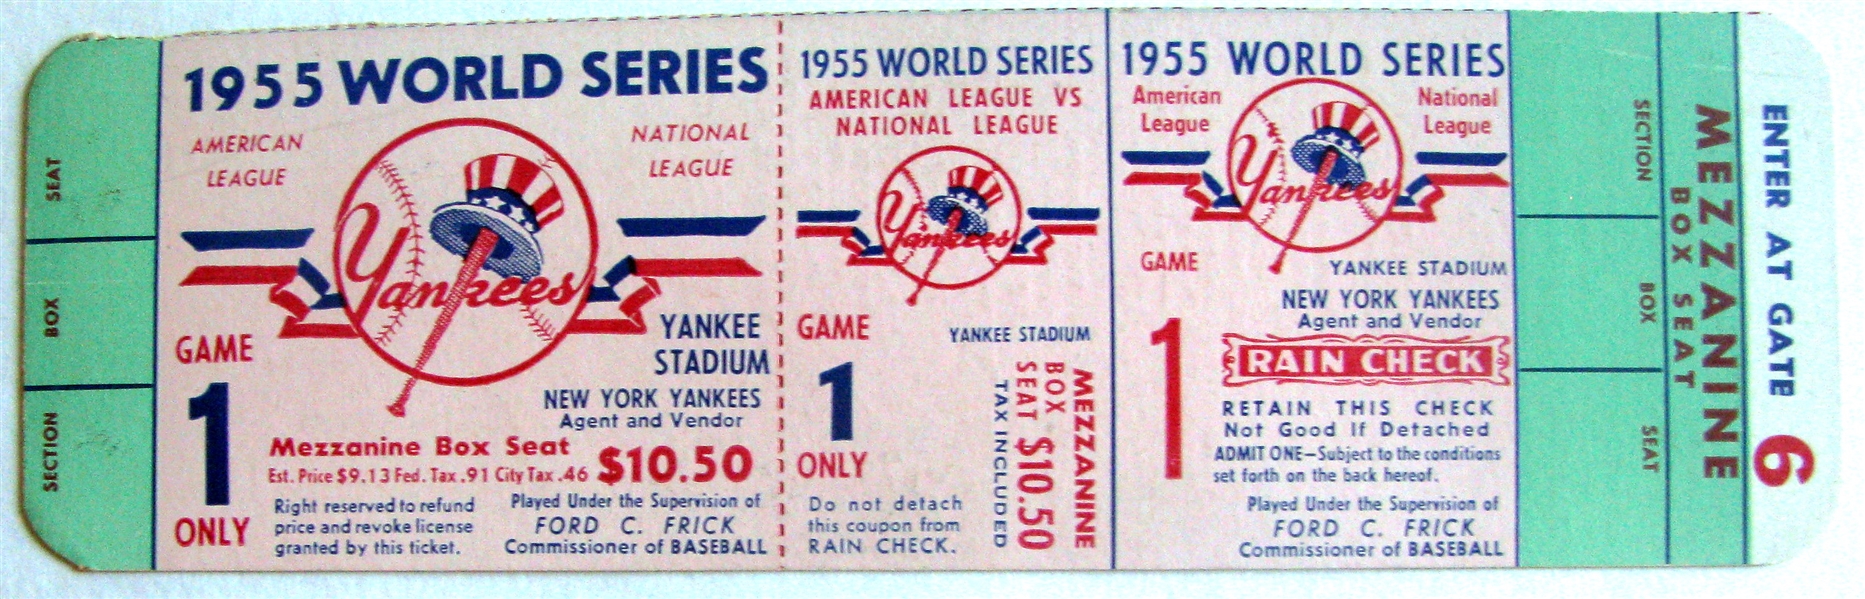 1955 WORLD SERIES FULL TICKET - JACKIE ROBINSON STEALS HOME